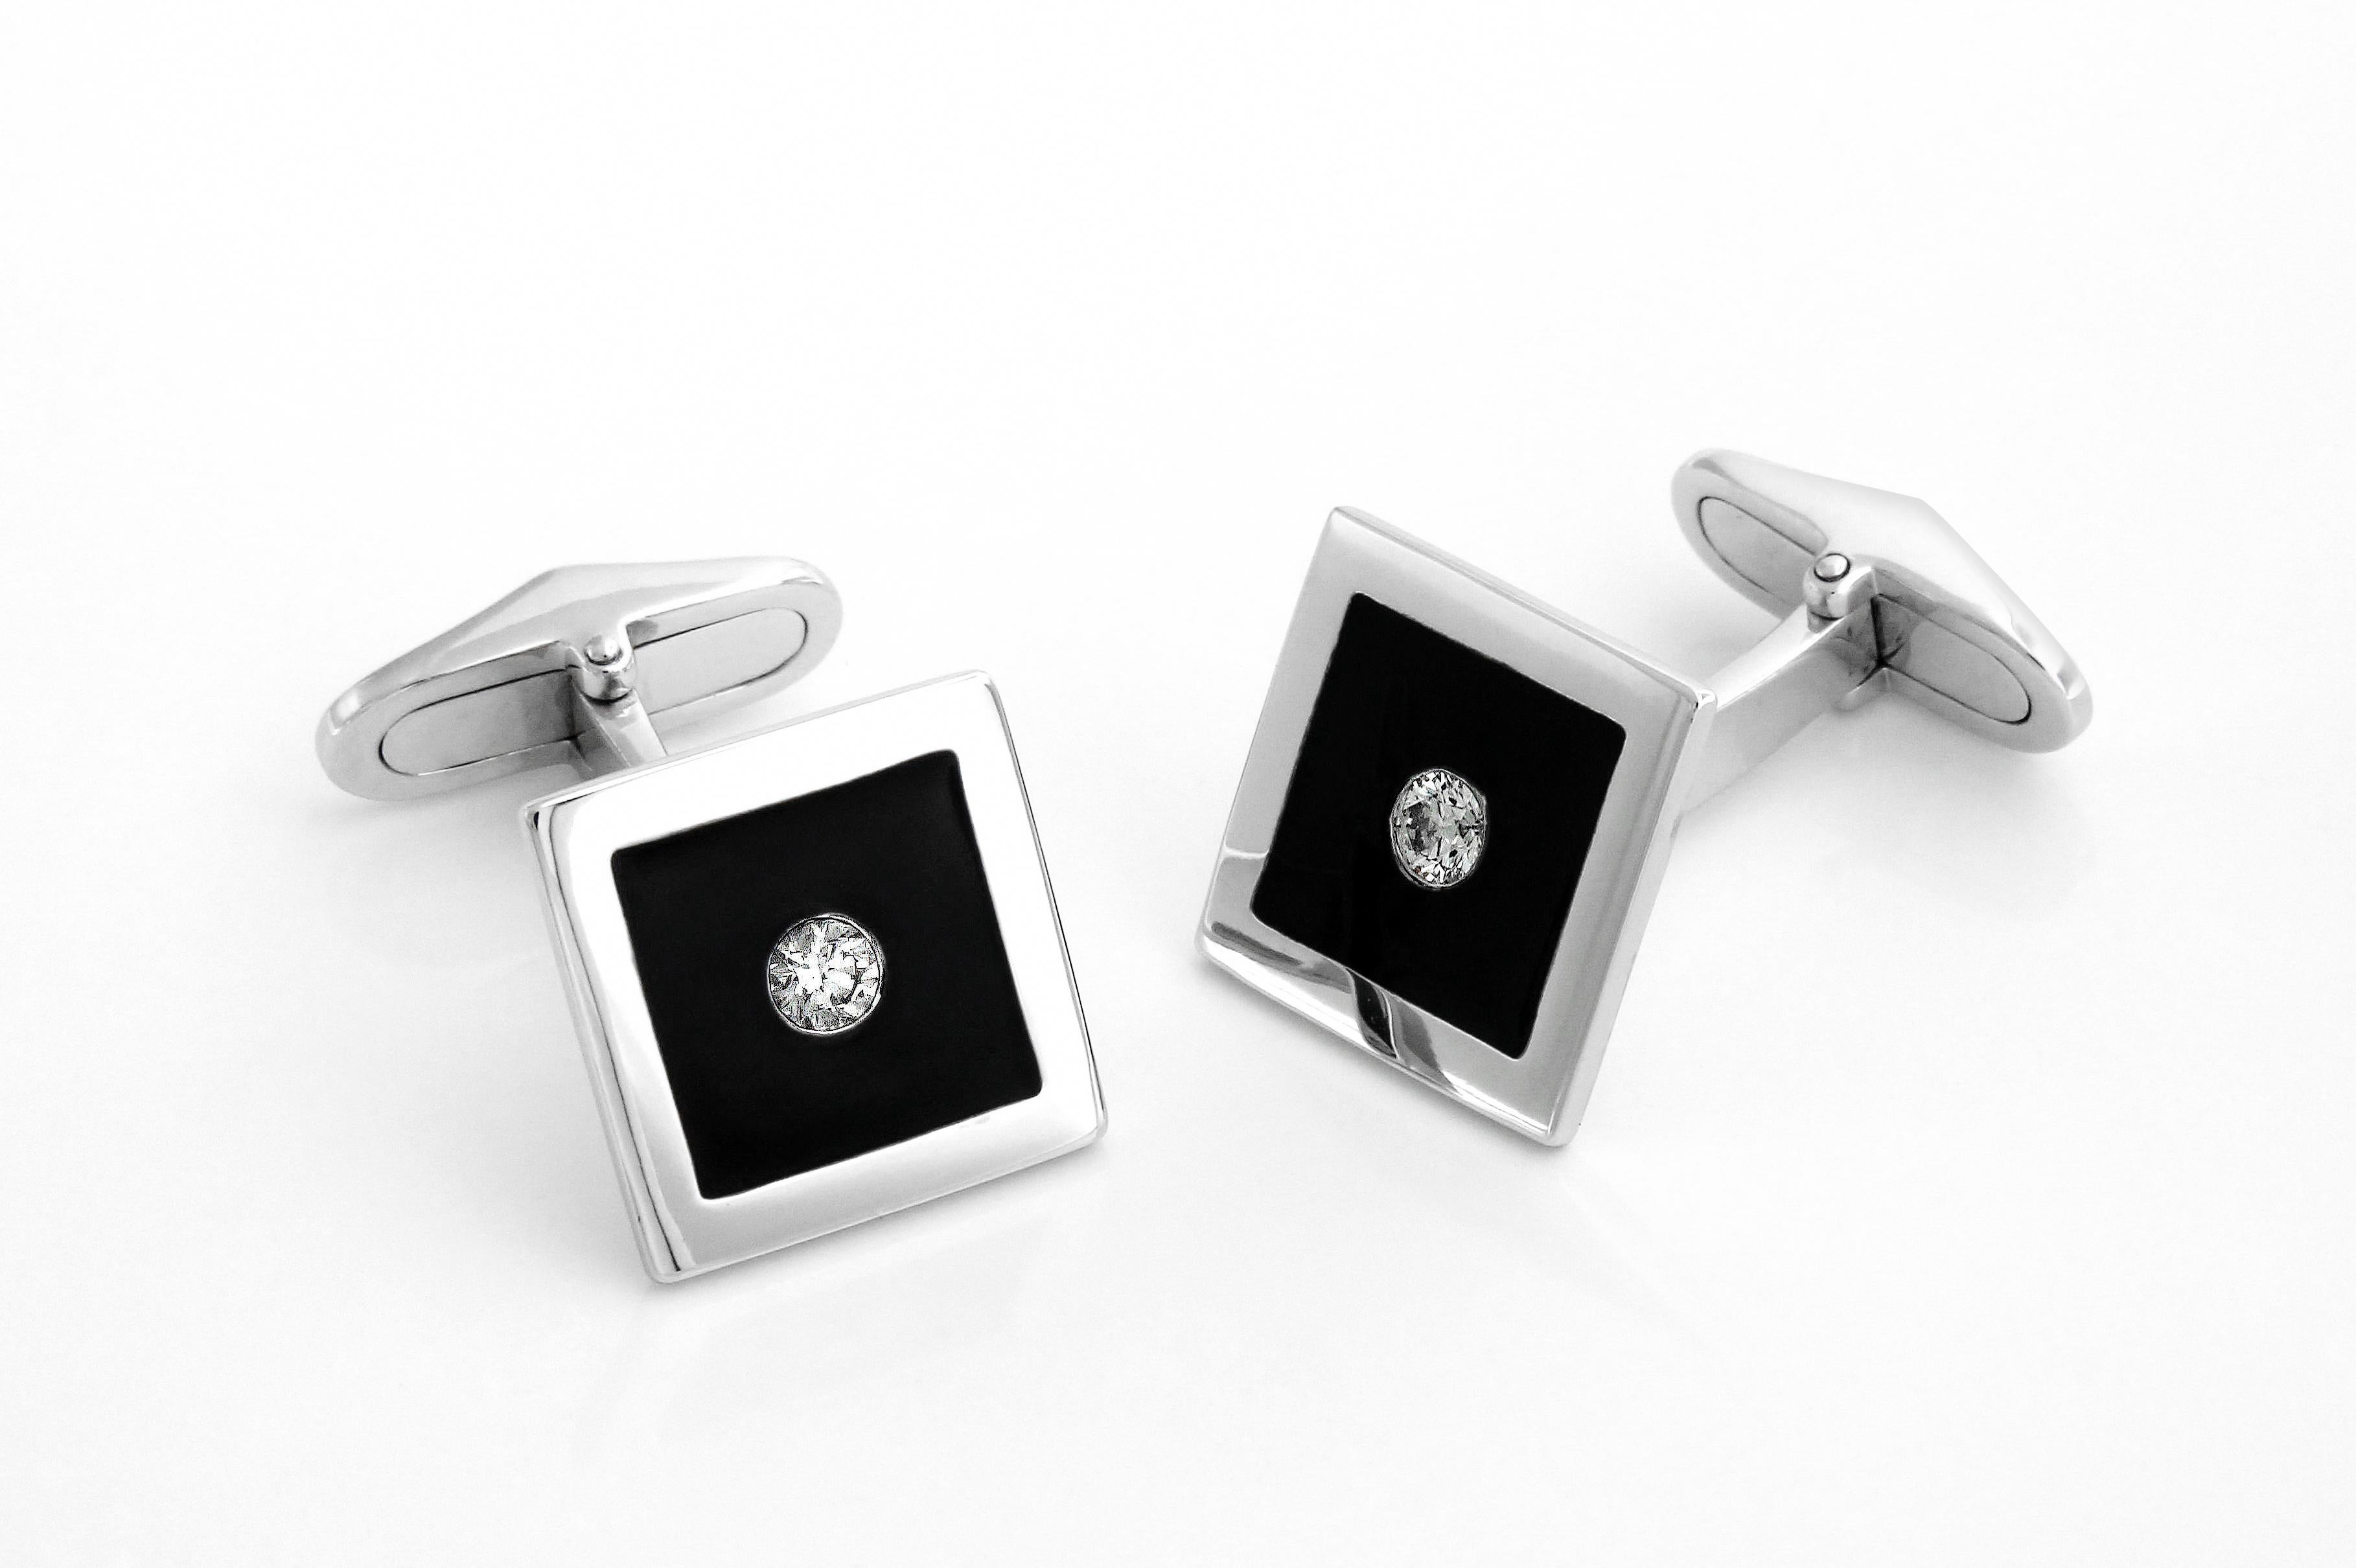 These enamel and diamond cufflinks were created for the sophiscated gent who loves to dress up but not be over stated. Made in 18k gold and set with two diamonds, they are the perfect accessory for the stylish man about town.